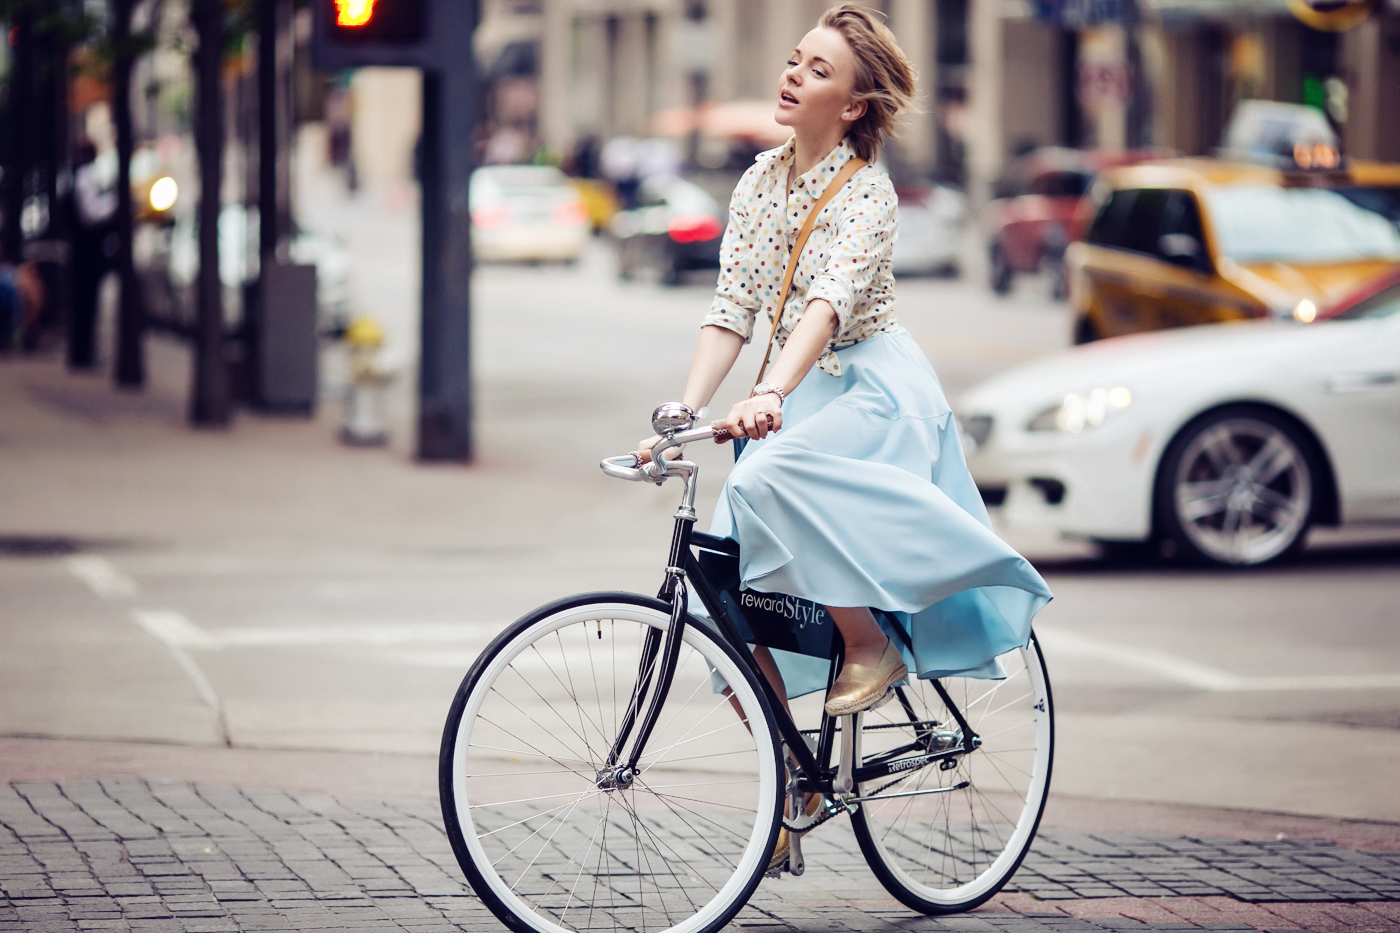 darya kamalova a fashion blogger from thecablook in dallas texas on the bycicle in polka dot shirt and blue skirt with gold espadrilles and other storie bag for rewardstyle rsthecon